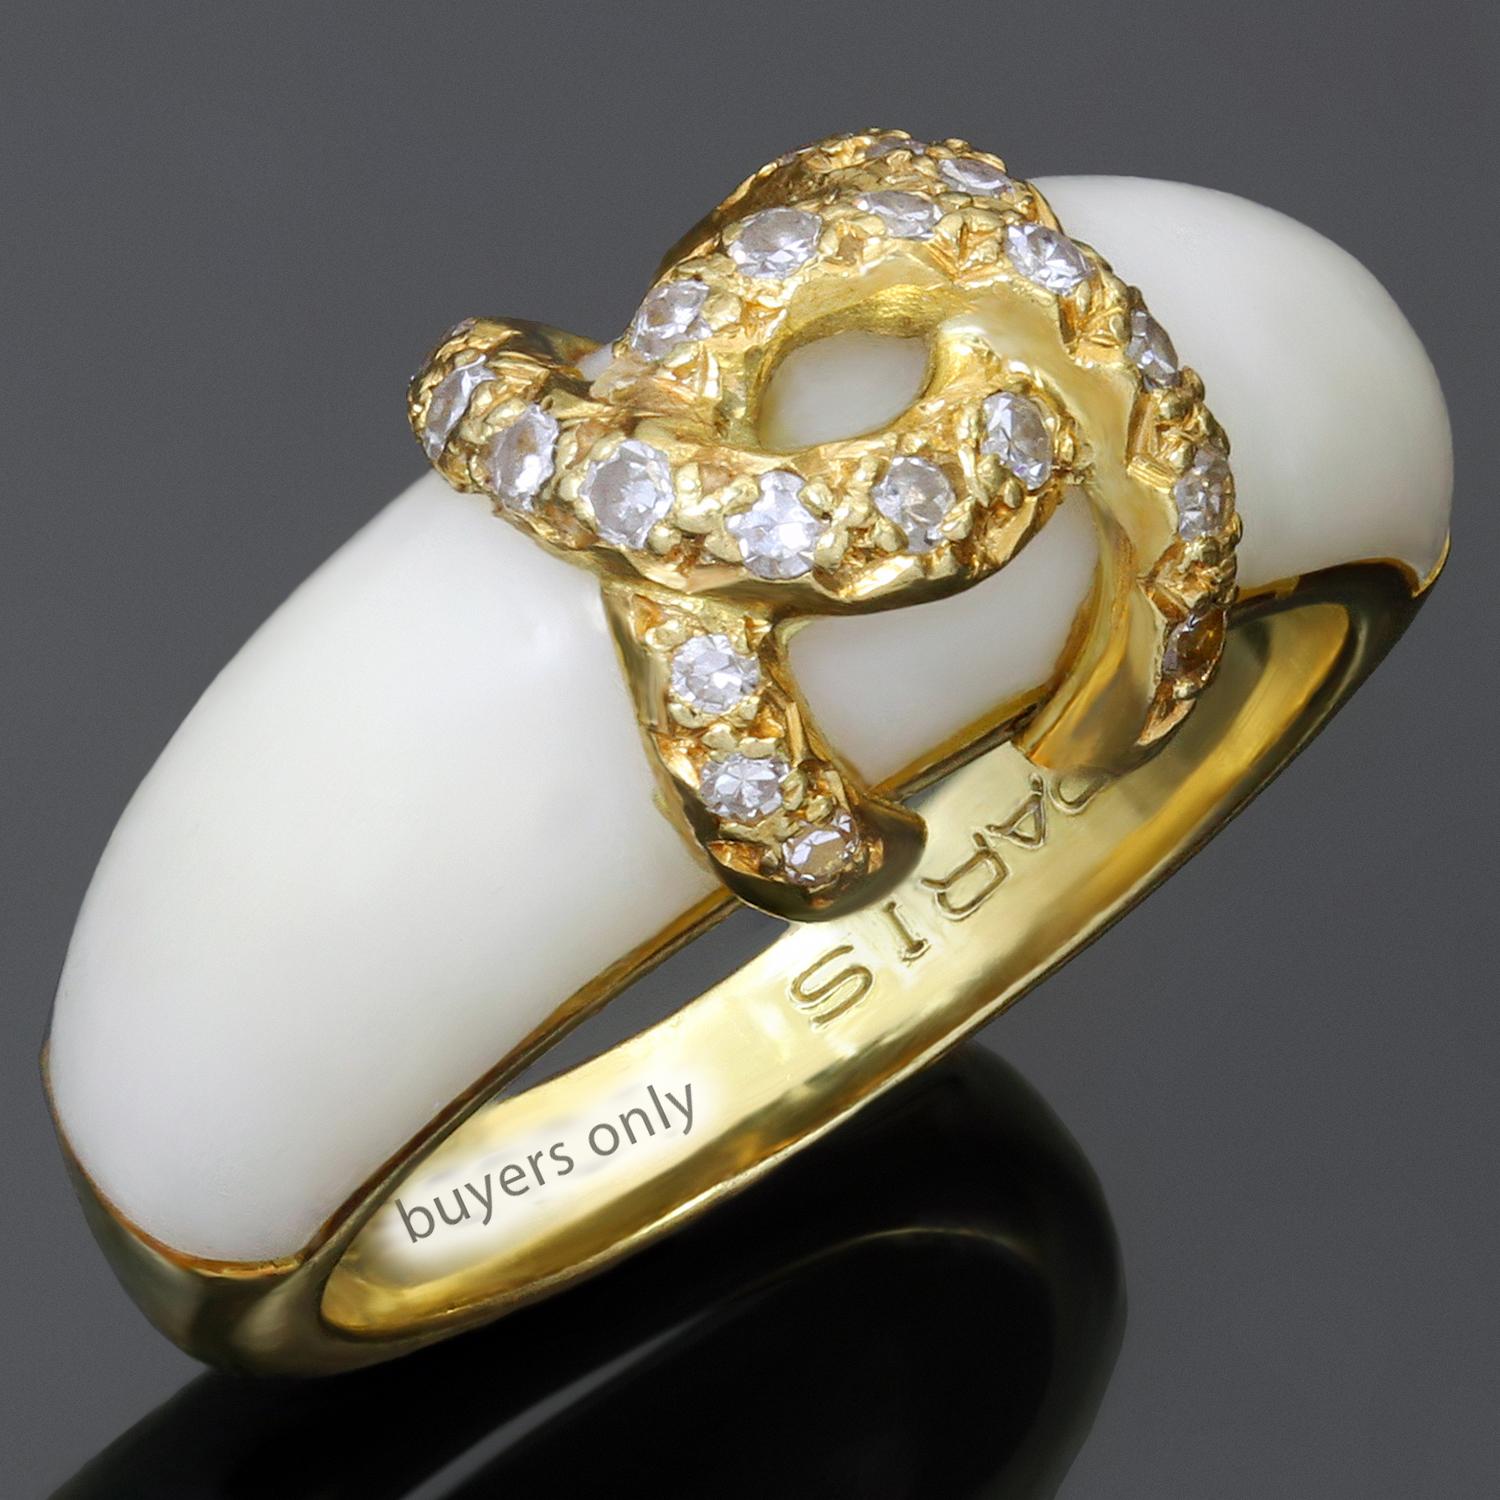 The classic antique Cartier ring is crafted in 18k yellow gold and accented with a carved white coral and single-cut diamonds weighing an estimated 0.25 carats. Marked Cartier and completed with French hallmarks. Made in France circa 1970s.